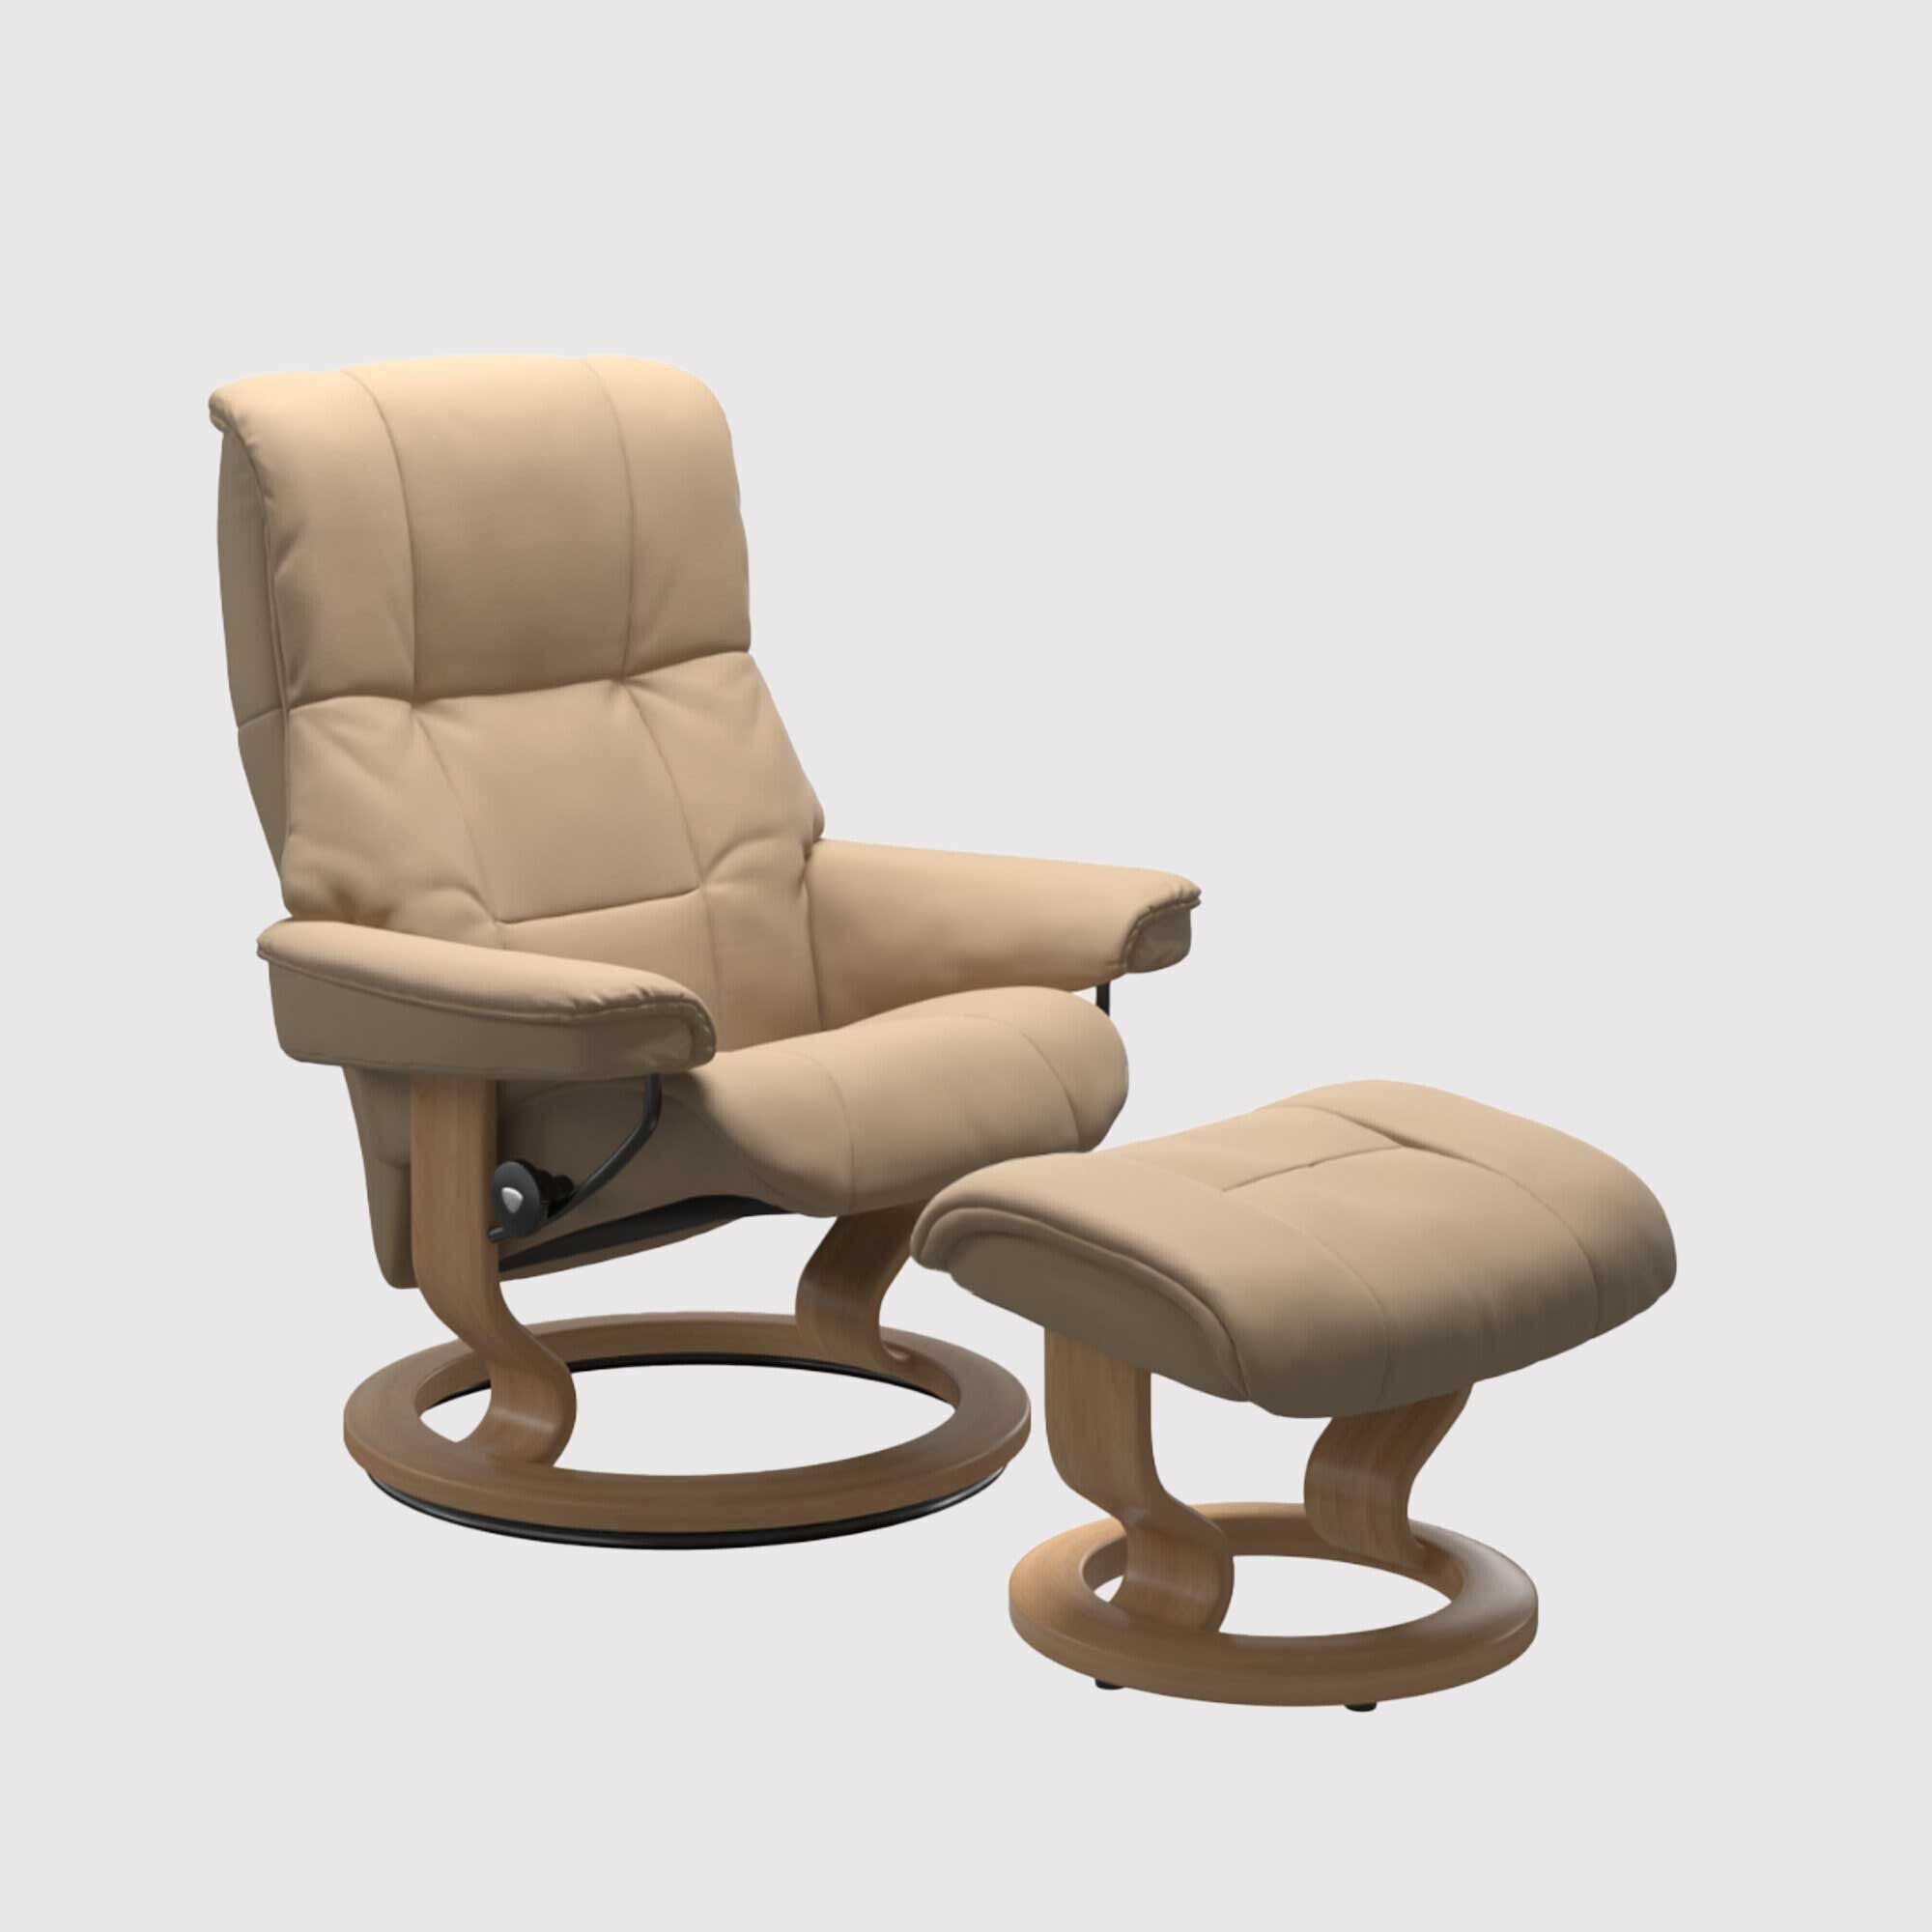 Stressless Mayfair Large Classic Recliner Chair w/footstool, Neutral | Barker & Stonehouse